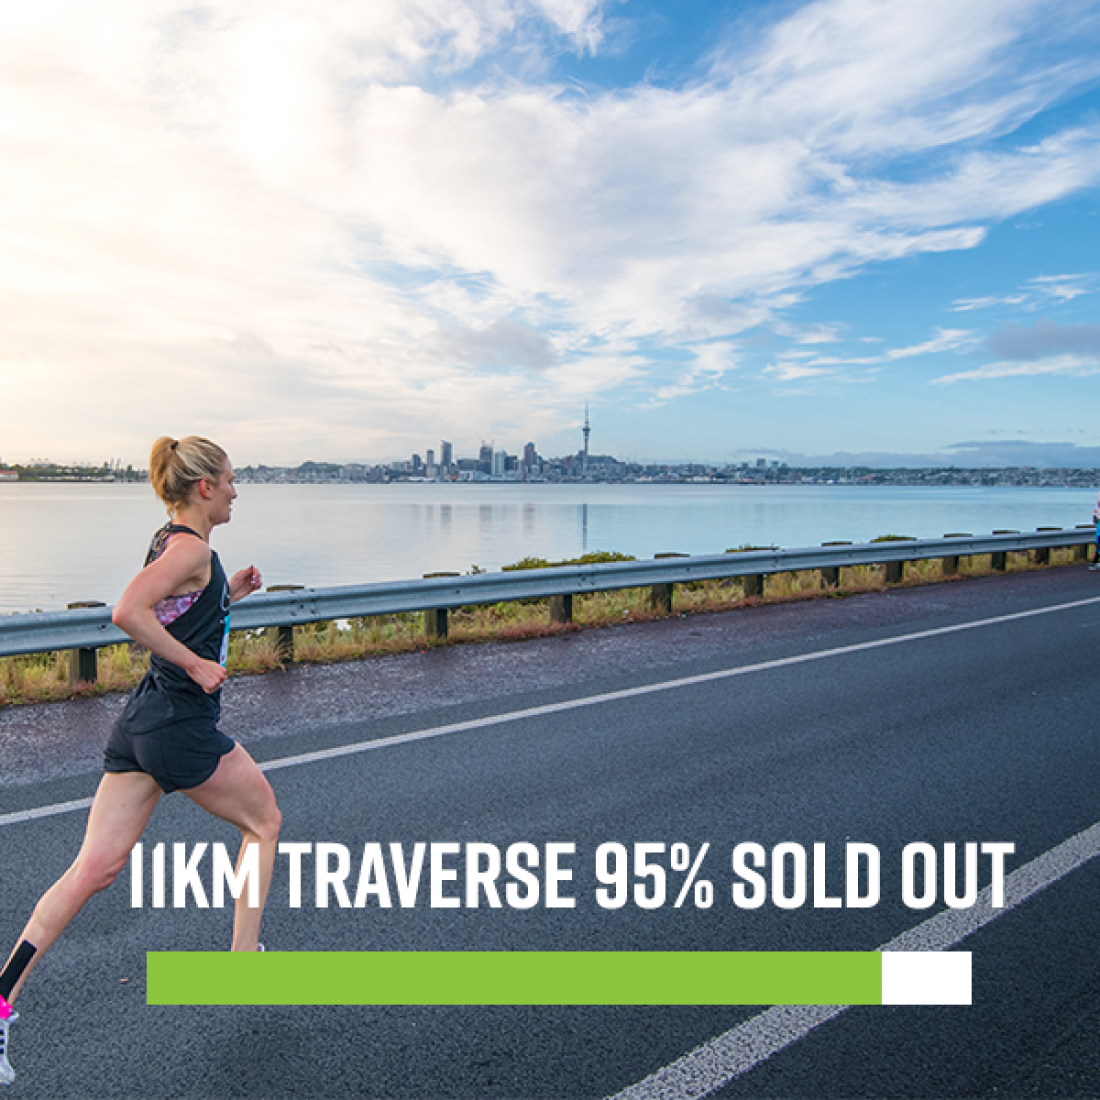 John West 11km Traverse 95% Sold Out